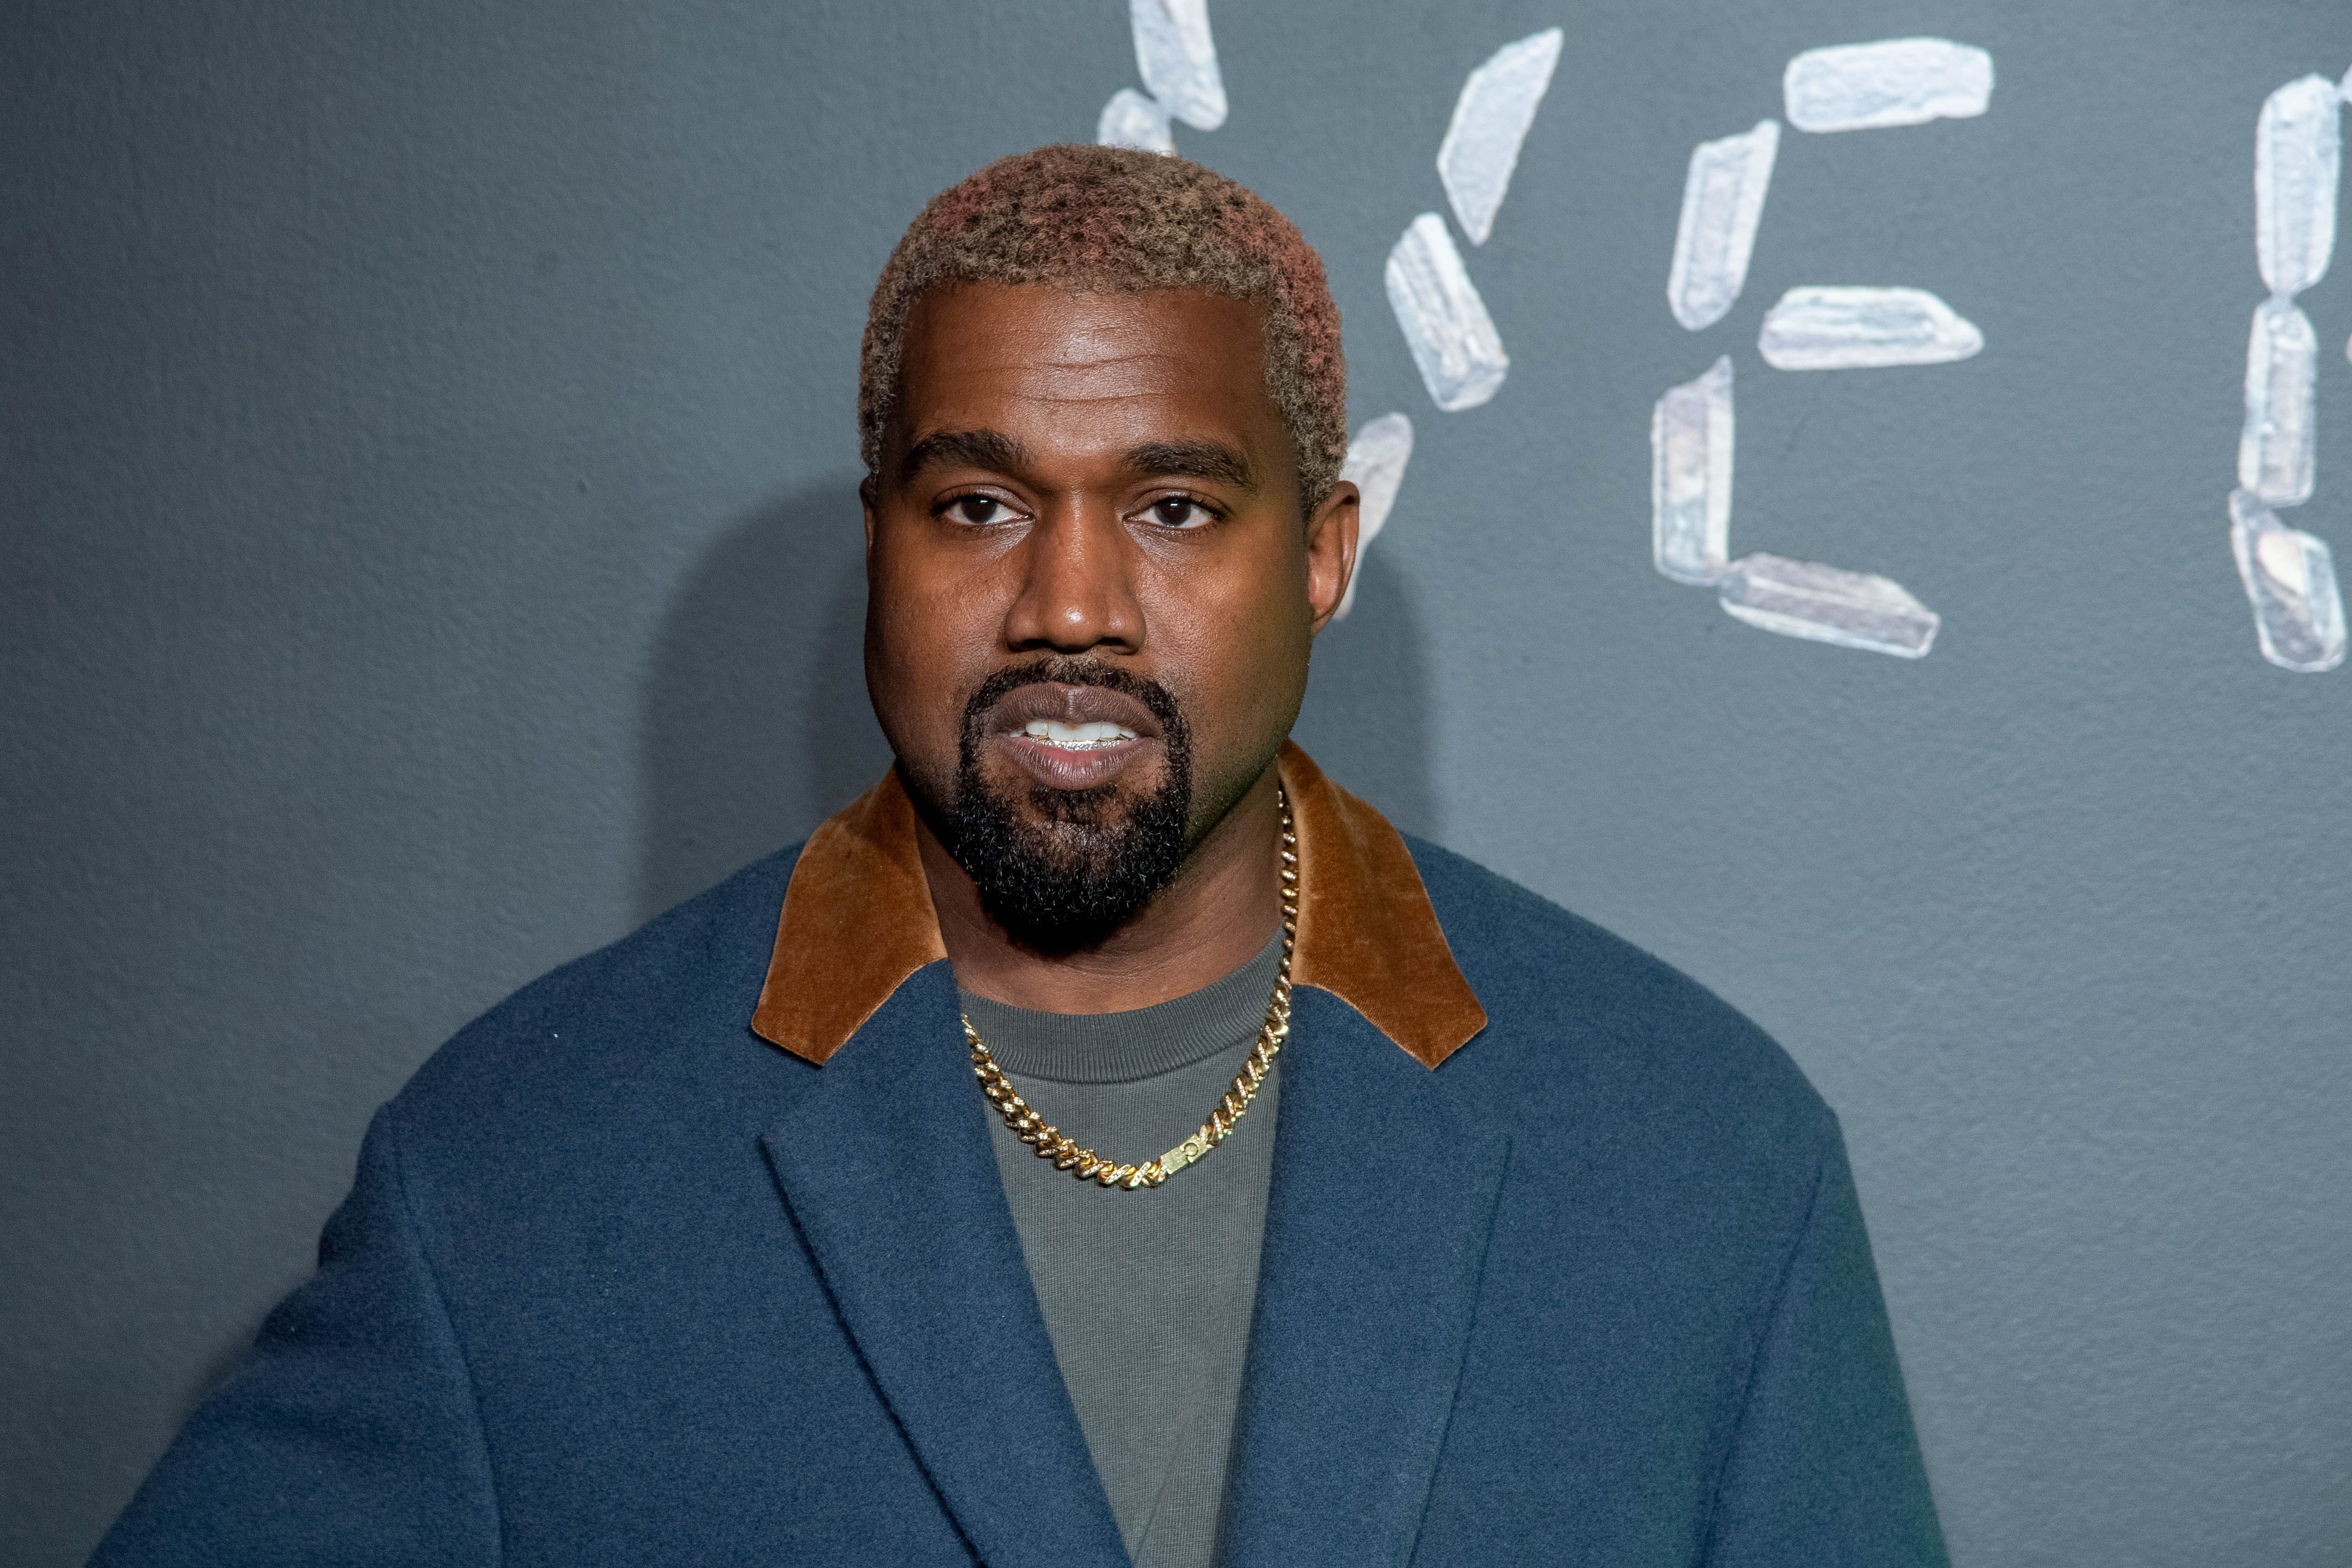 Kanye West at the Versace fall fashion show at the American Stock Exchange Building in lower Manhattan on December 2, 2018, in New York City | Photo: Roy Rochlin/Getty Images